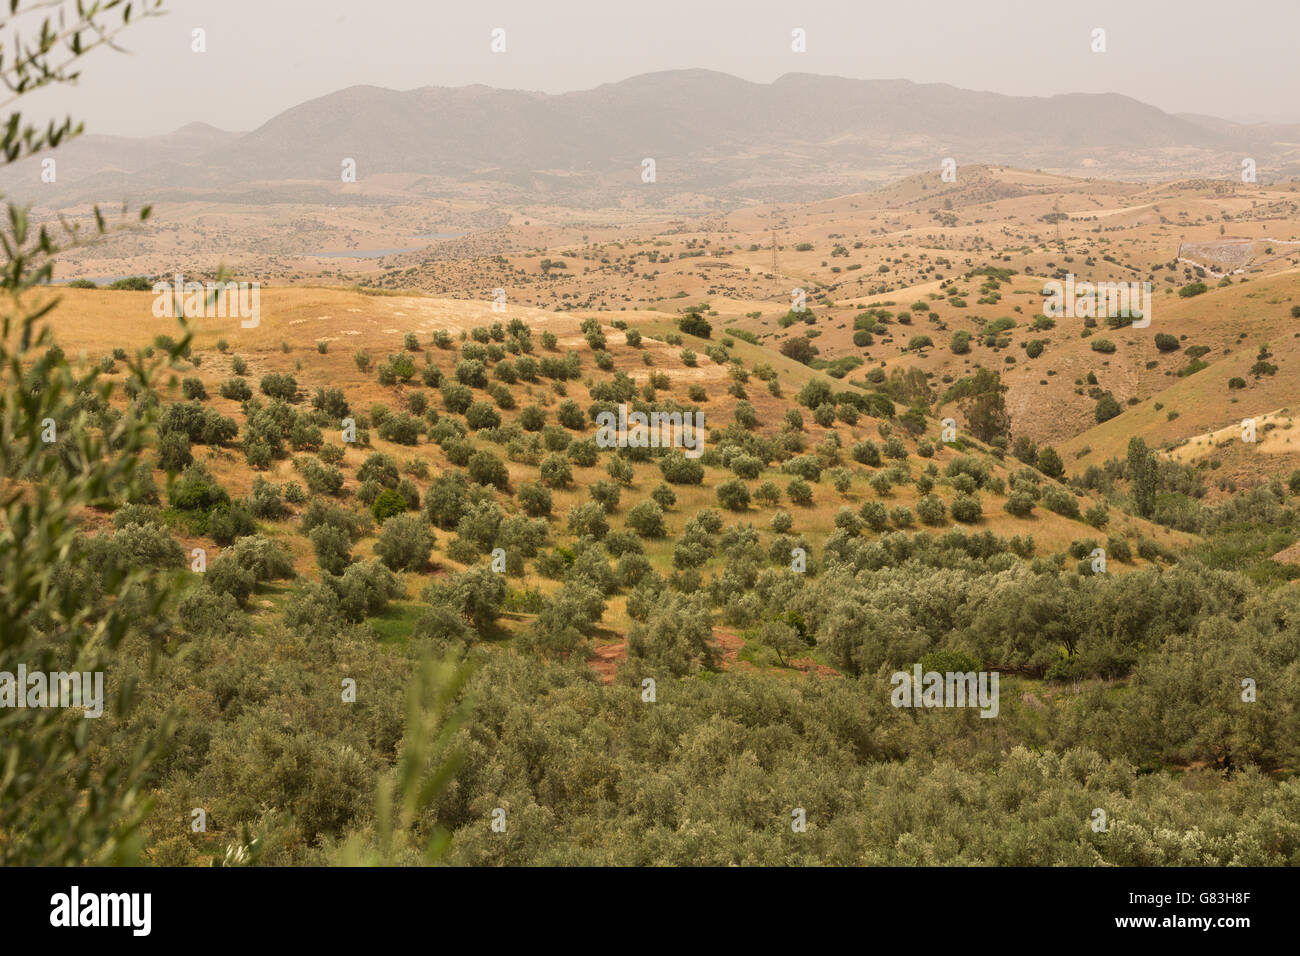 An irrigated olive tree grove stands outside the town of S'Hak, in central Morocco. Stock Photo